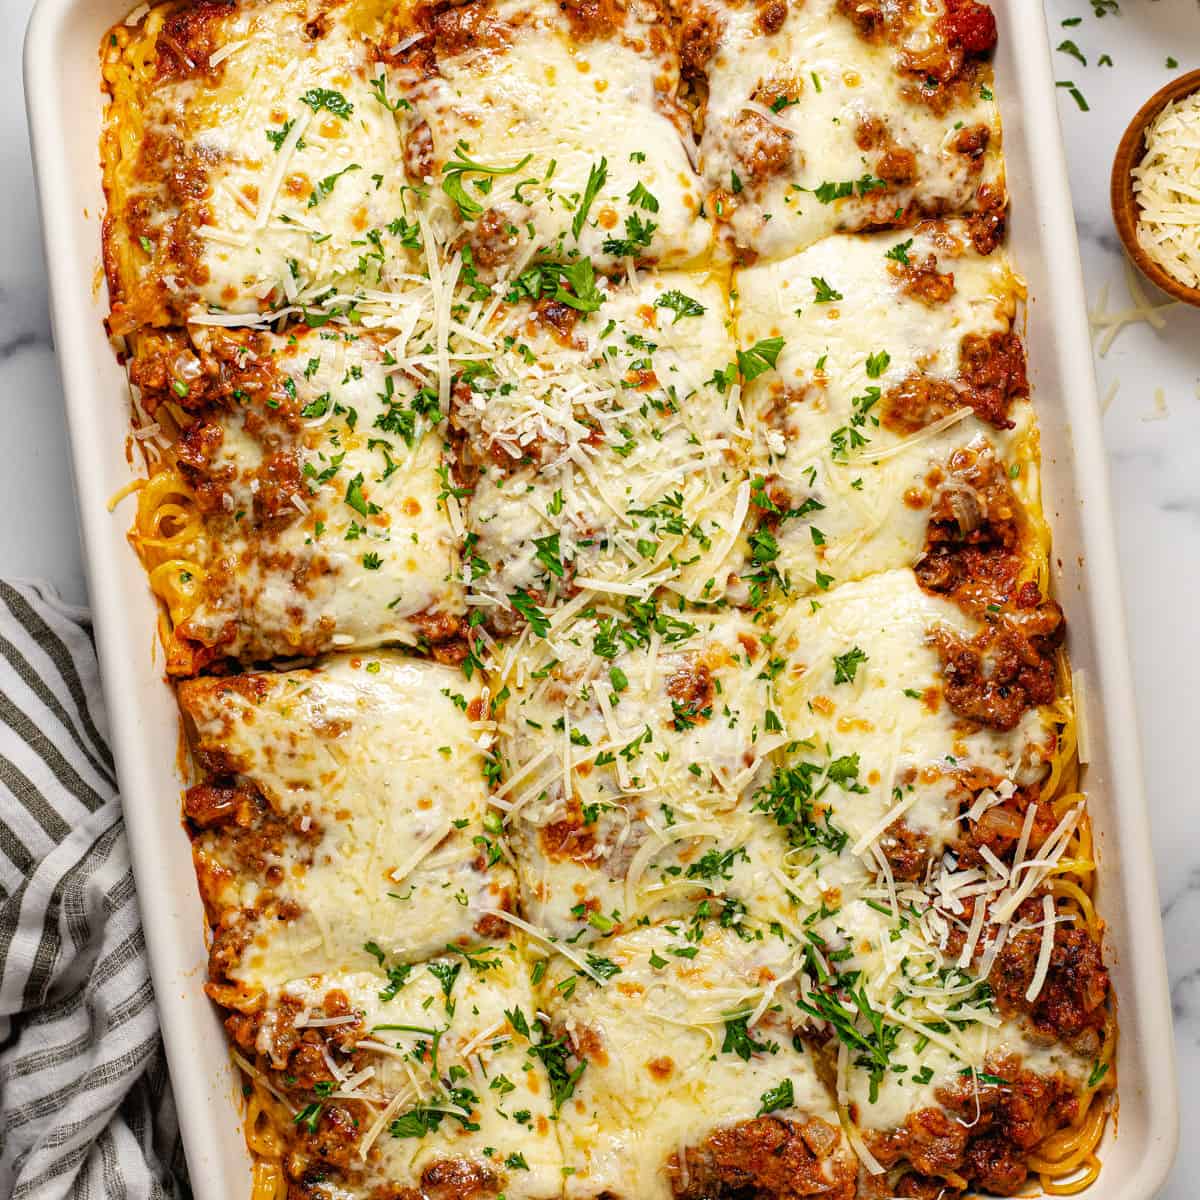 Cheesy Baked Spaghetti Recipe with Ground Beef